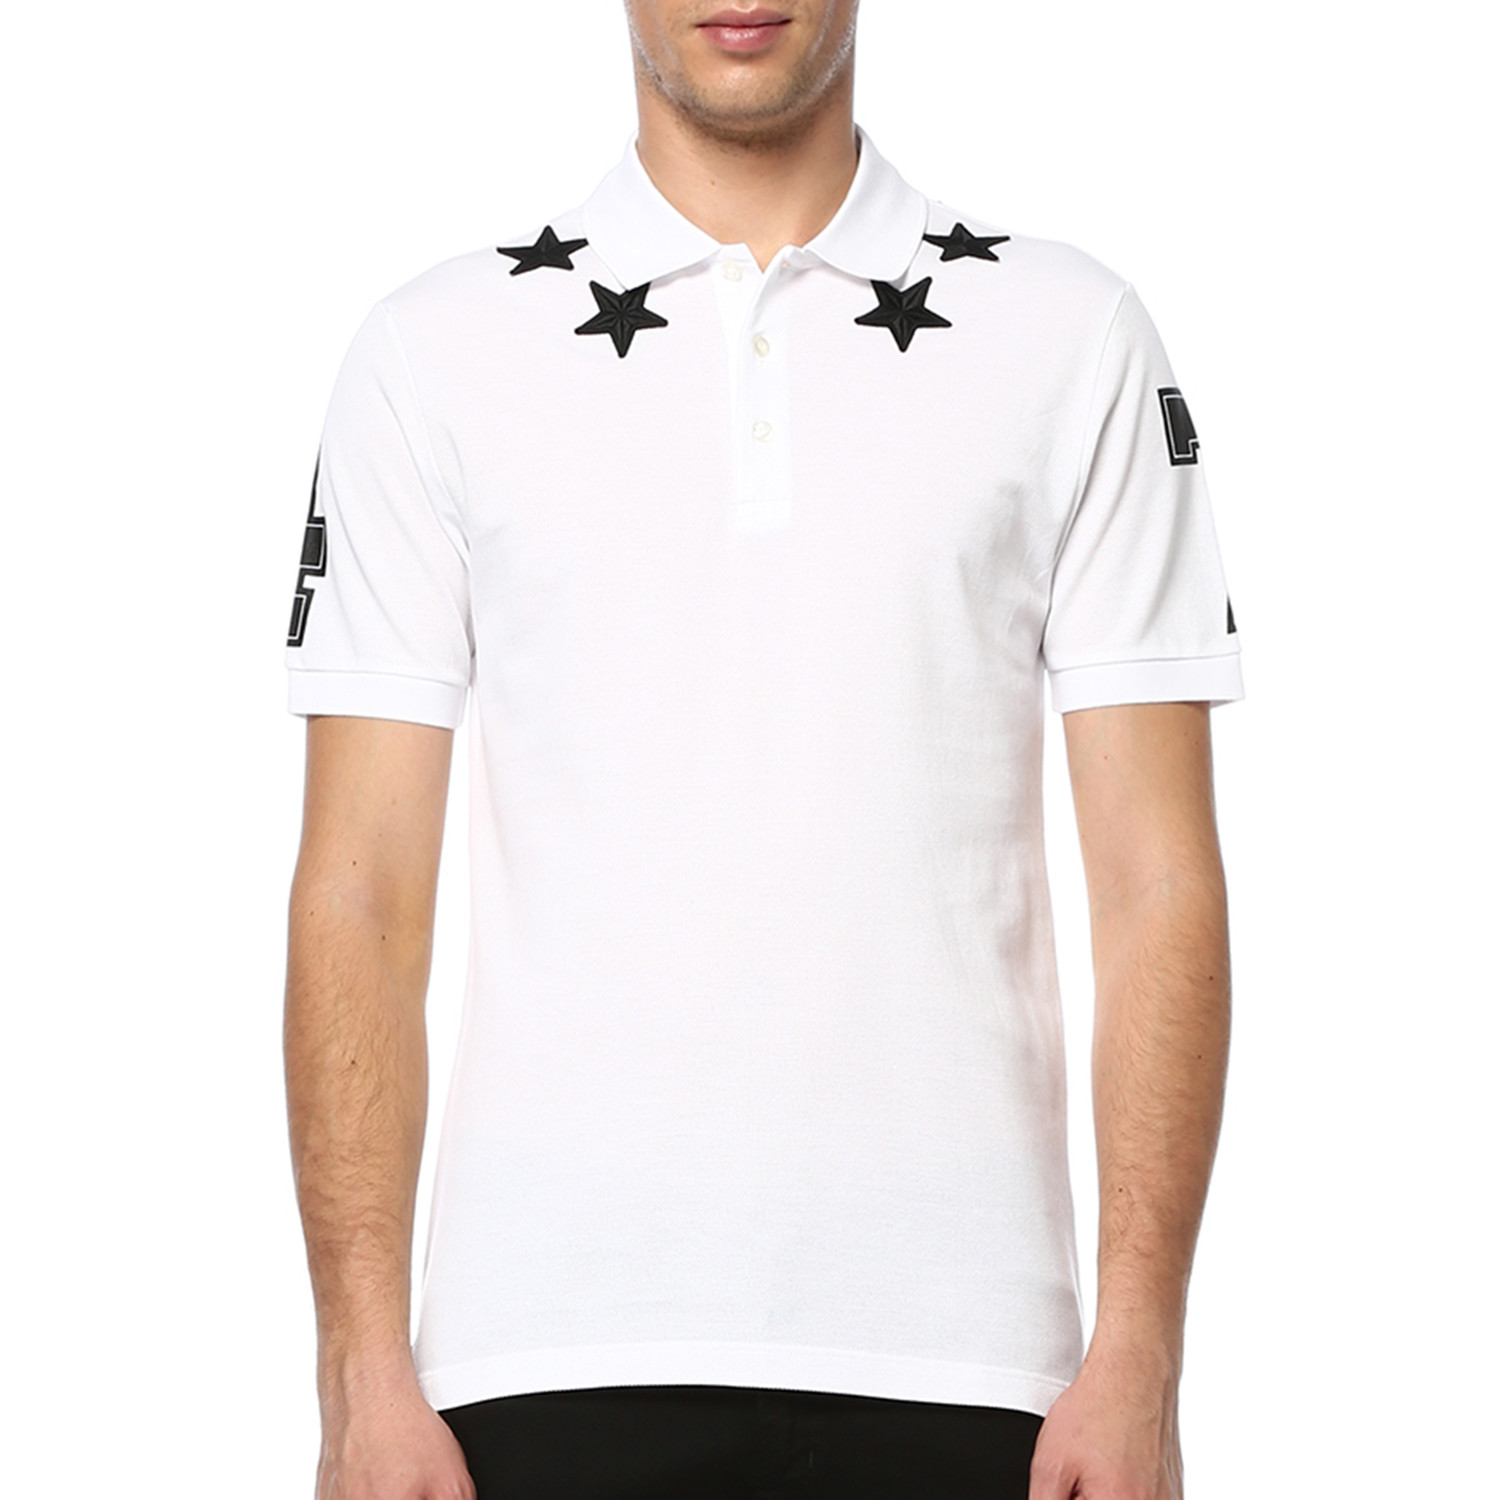 givenchy star polo red